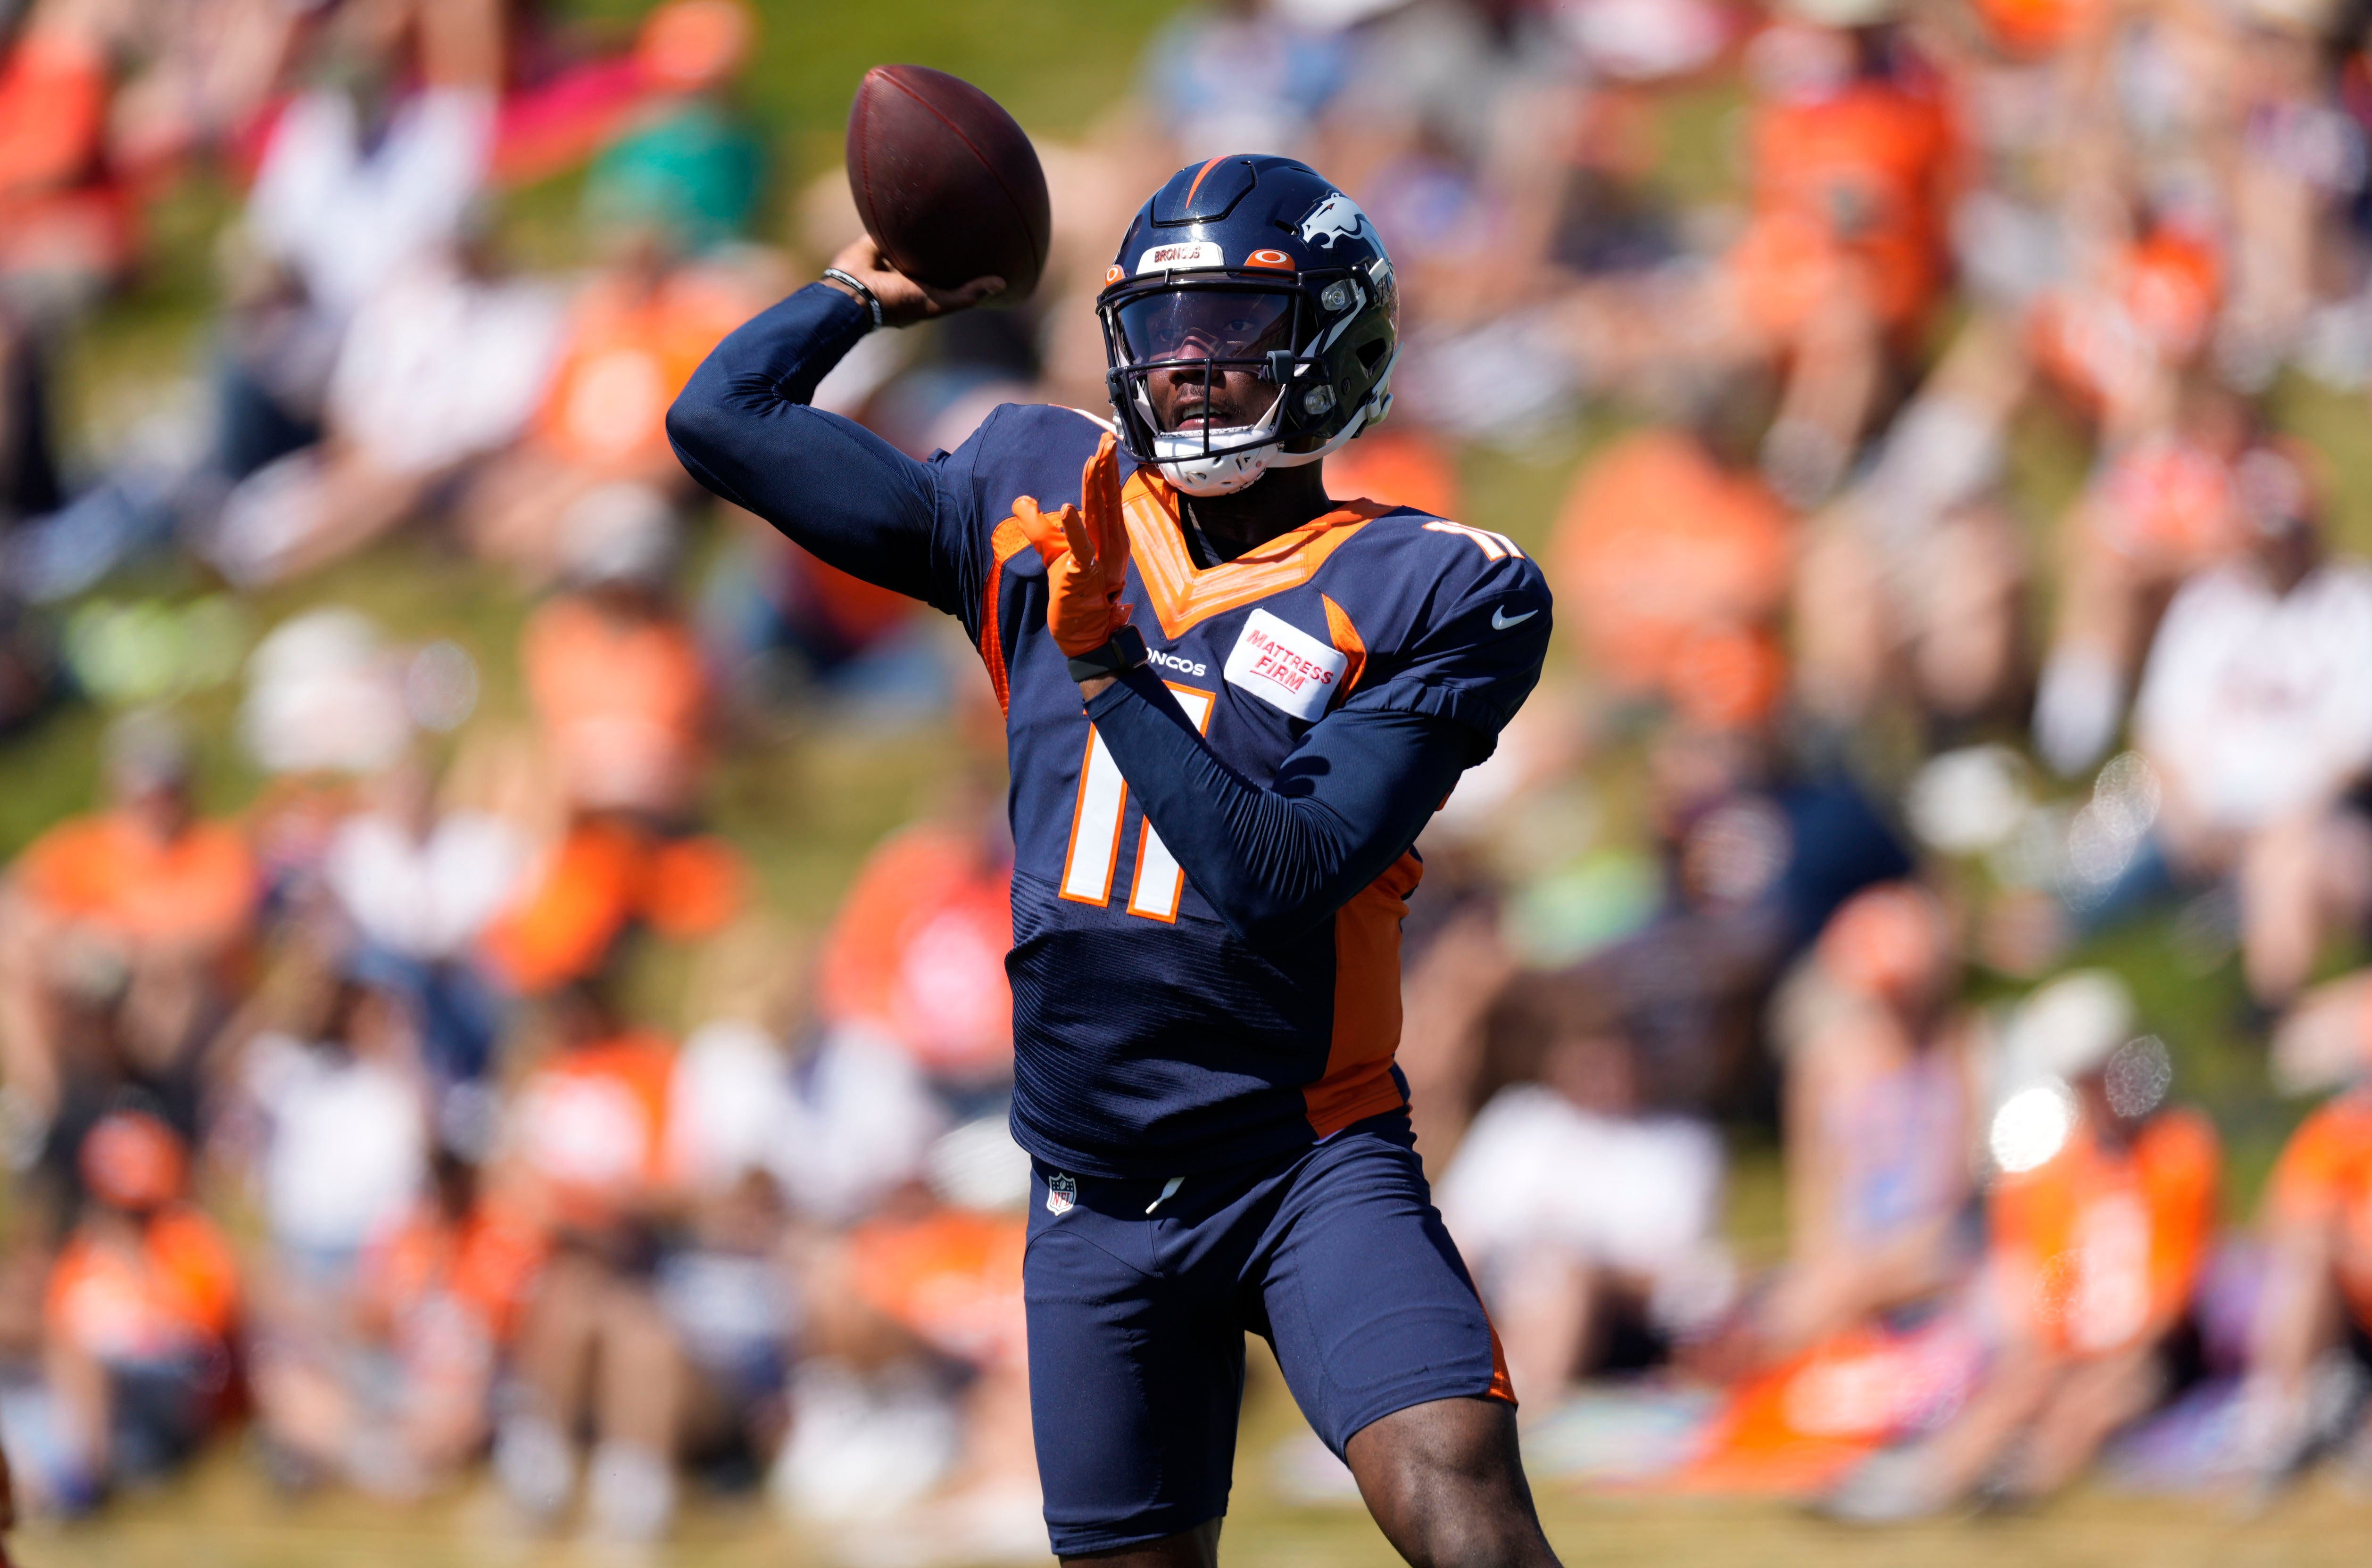 James Johnson will compete on his 14th NFL team after seeing Denver Broncos training camp